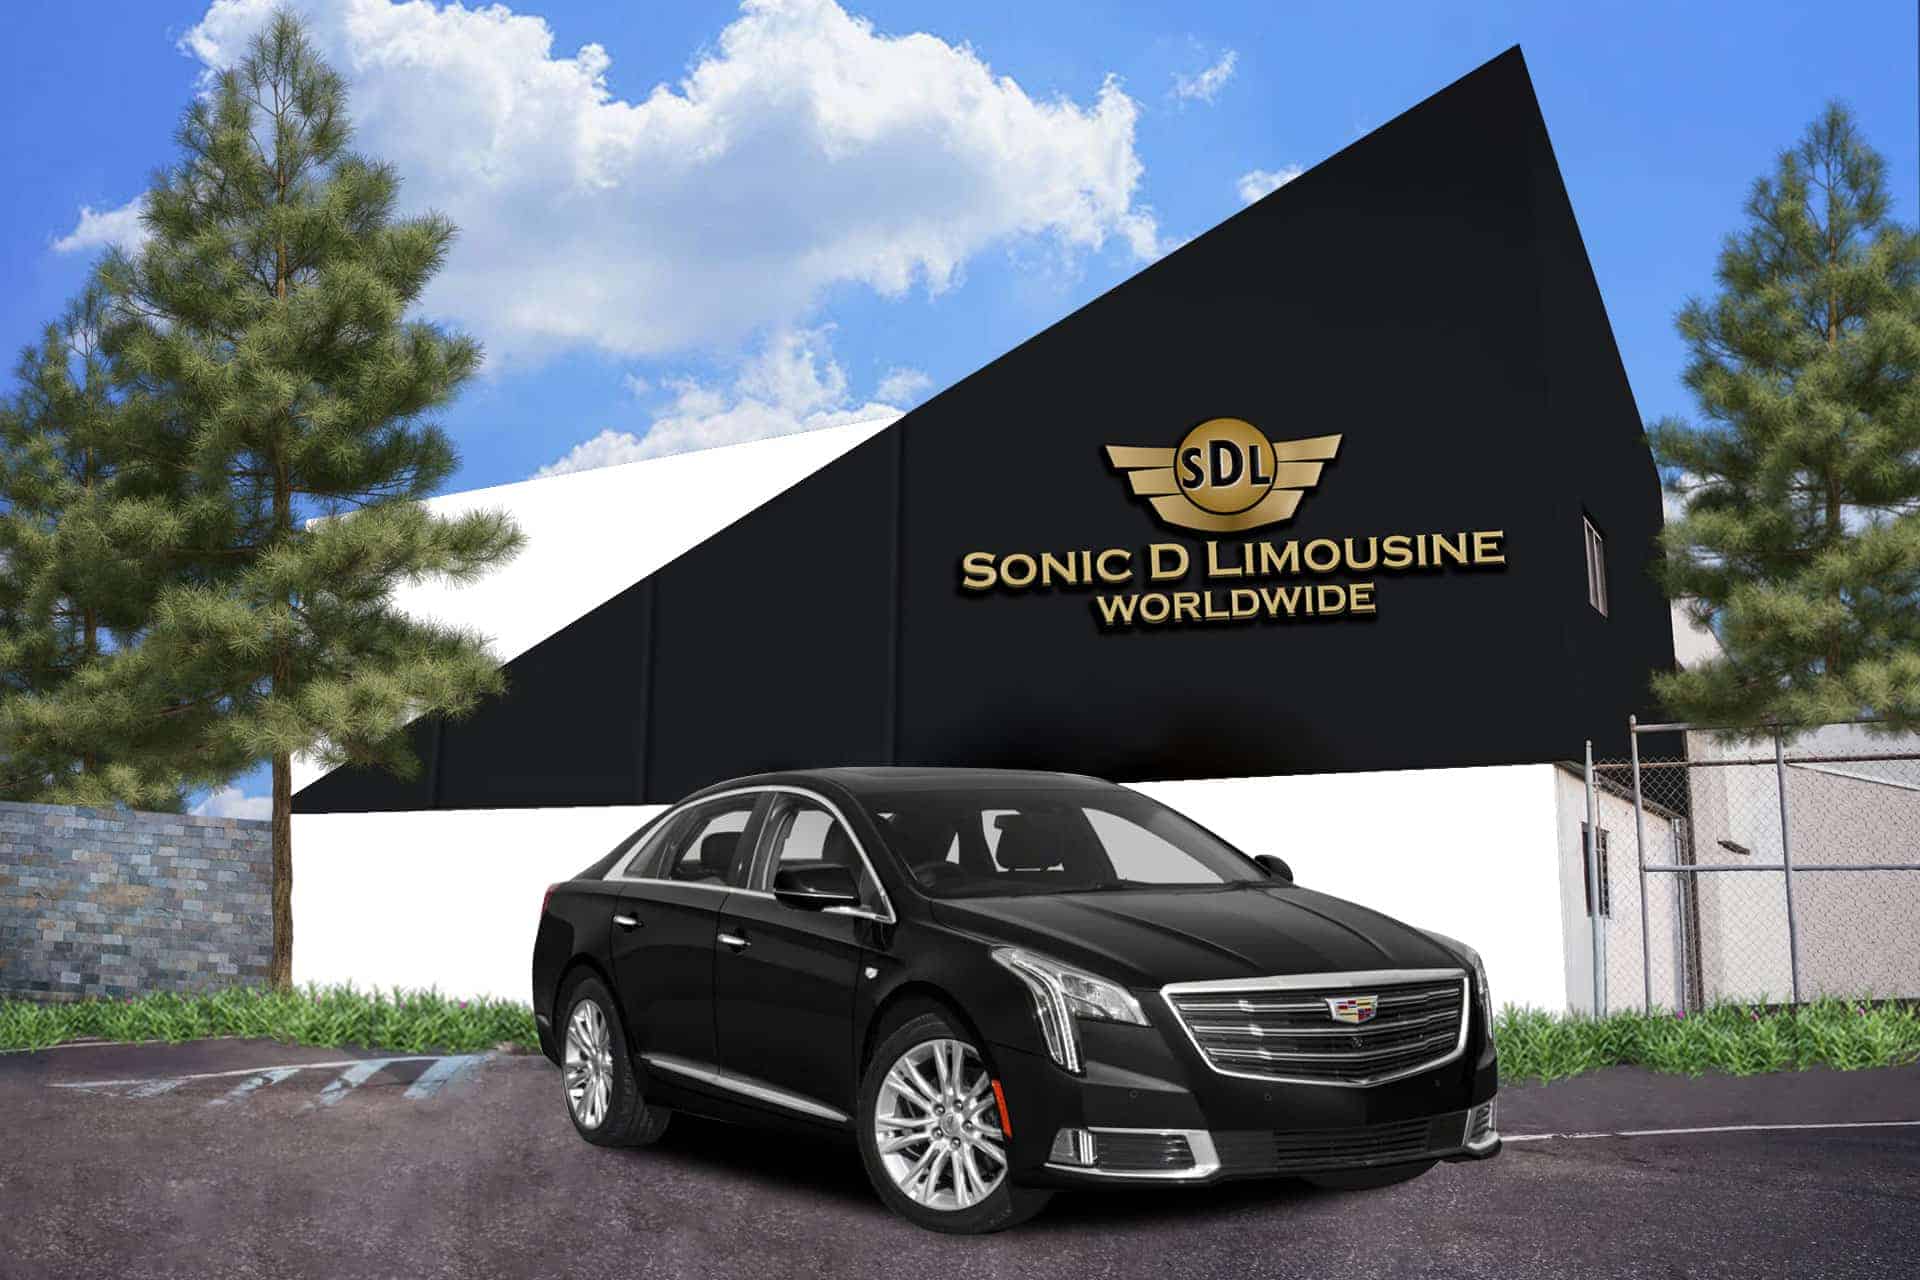 Cadillac XTS with sonic D Limousine